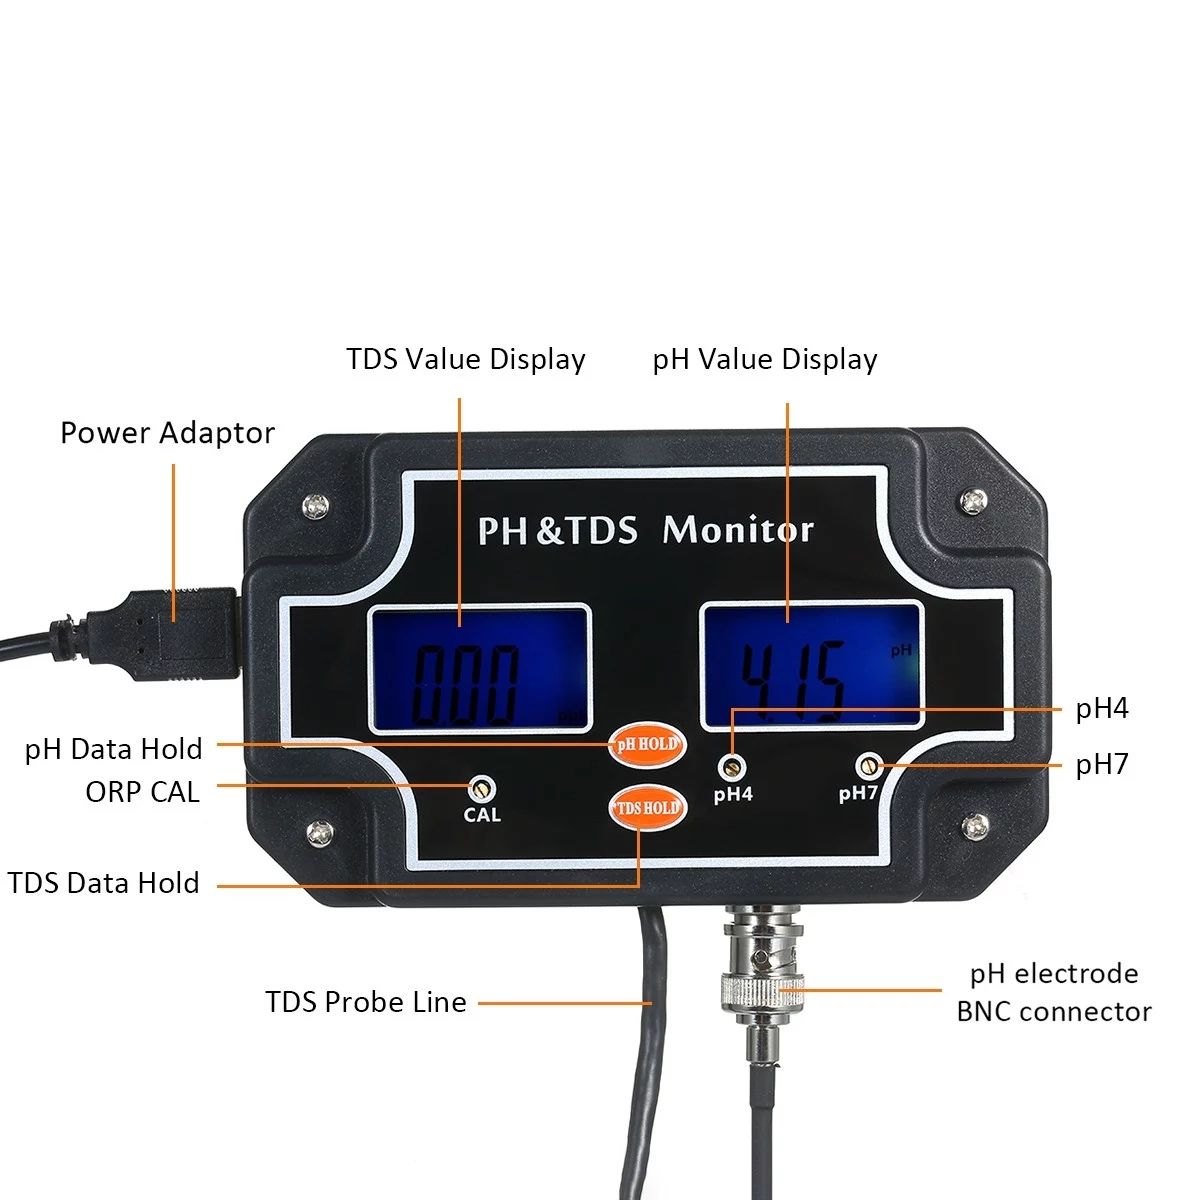 PHTDS-2683-2-in-1-Water-Quality-Tester-pHTDS-Meter-Waterproof-Double-Display-Tester-Black-EU-Plug-1748254